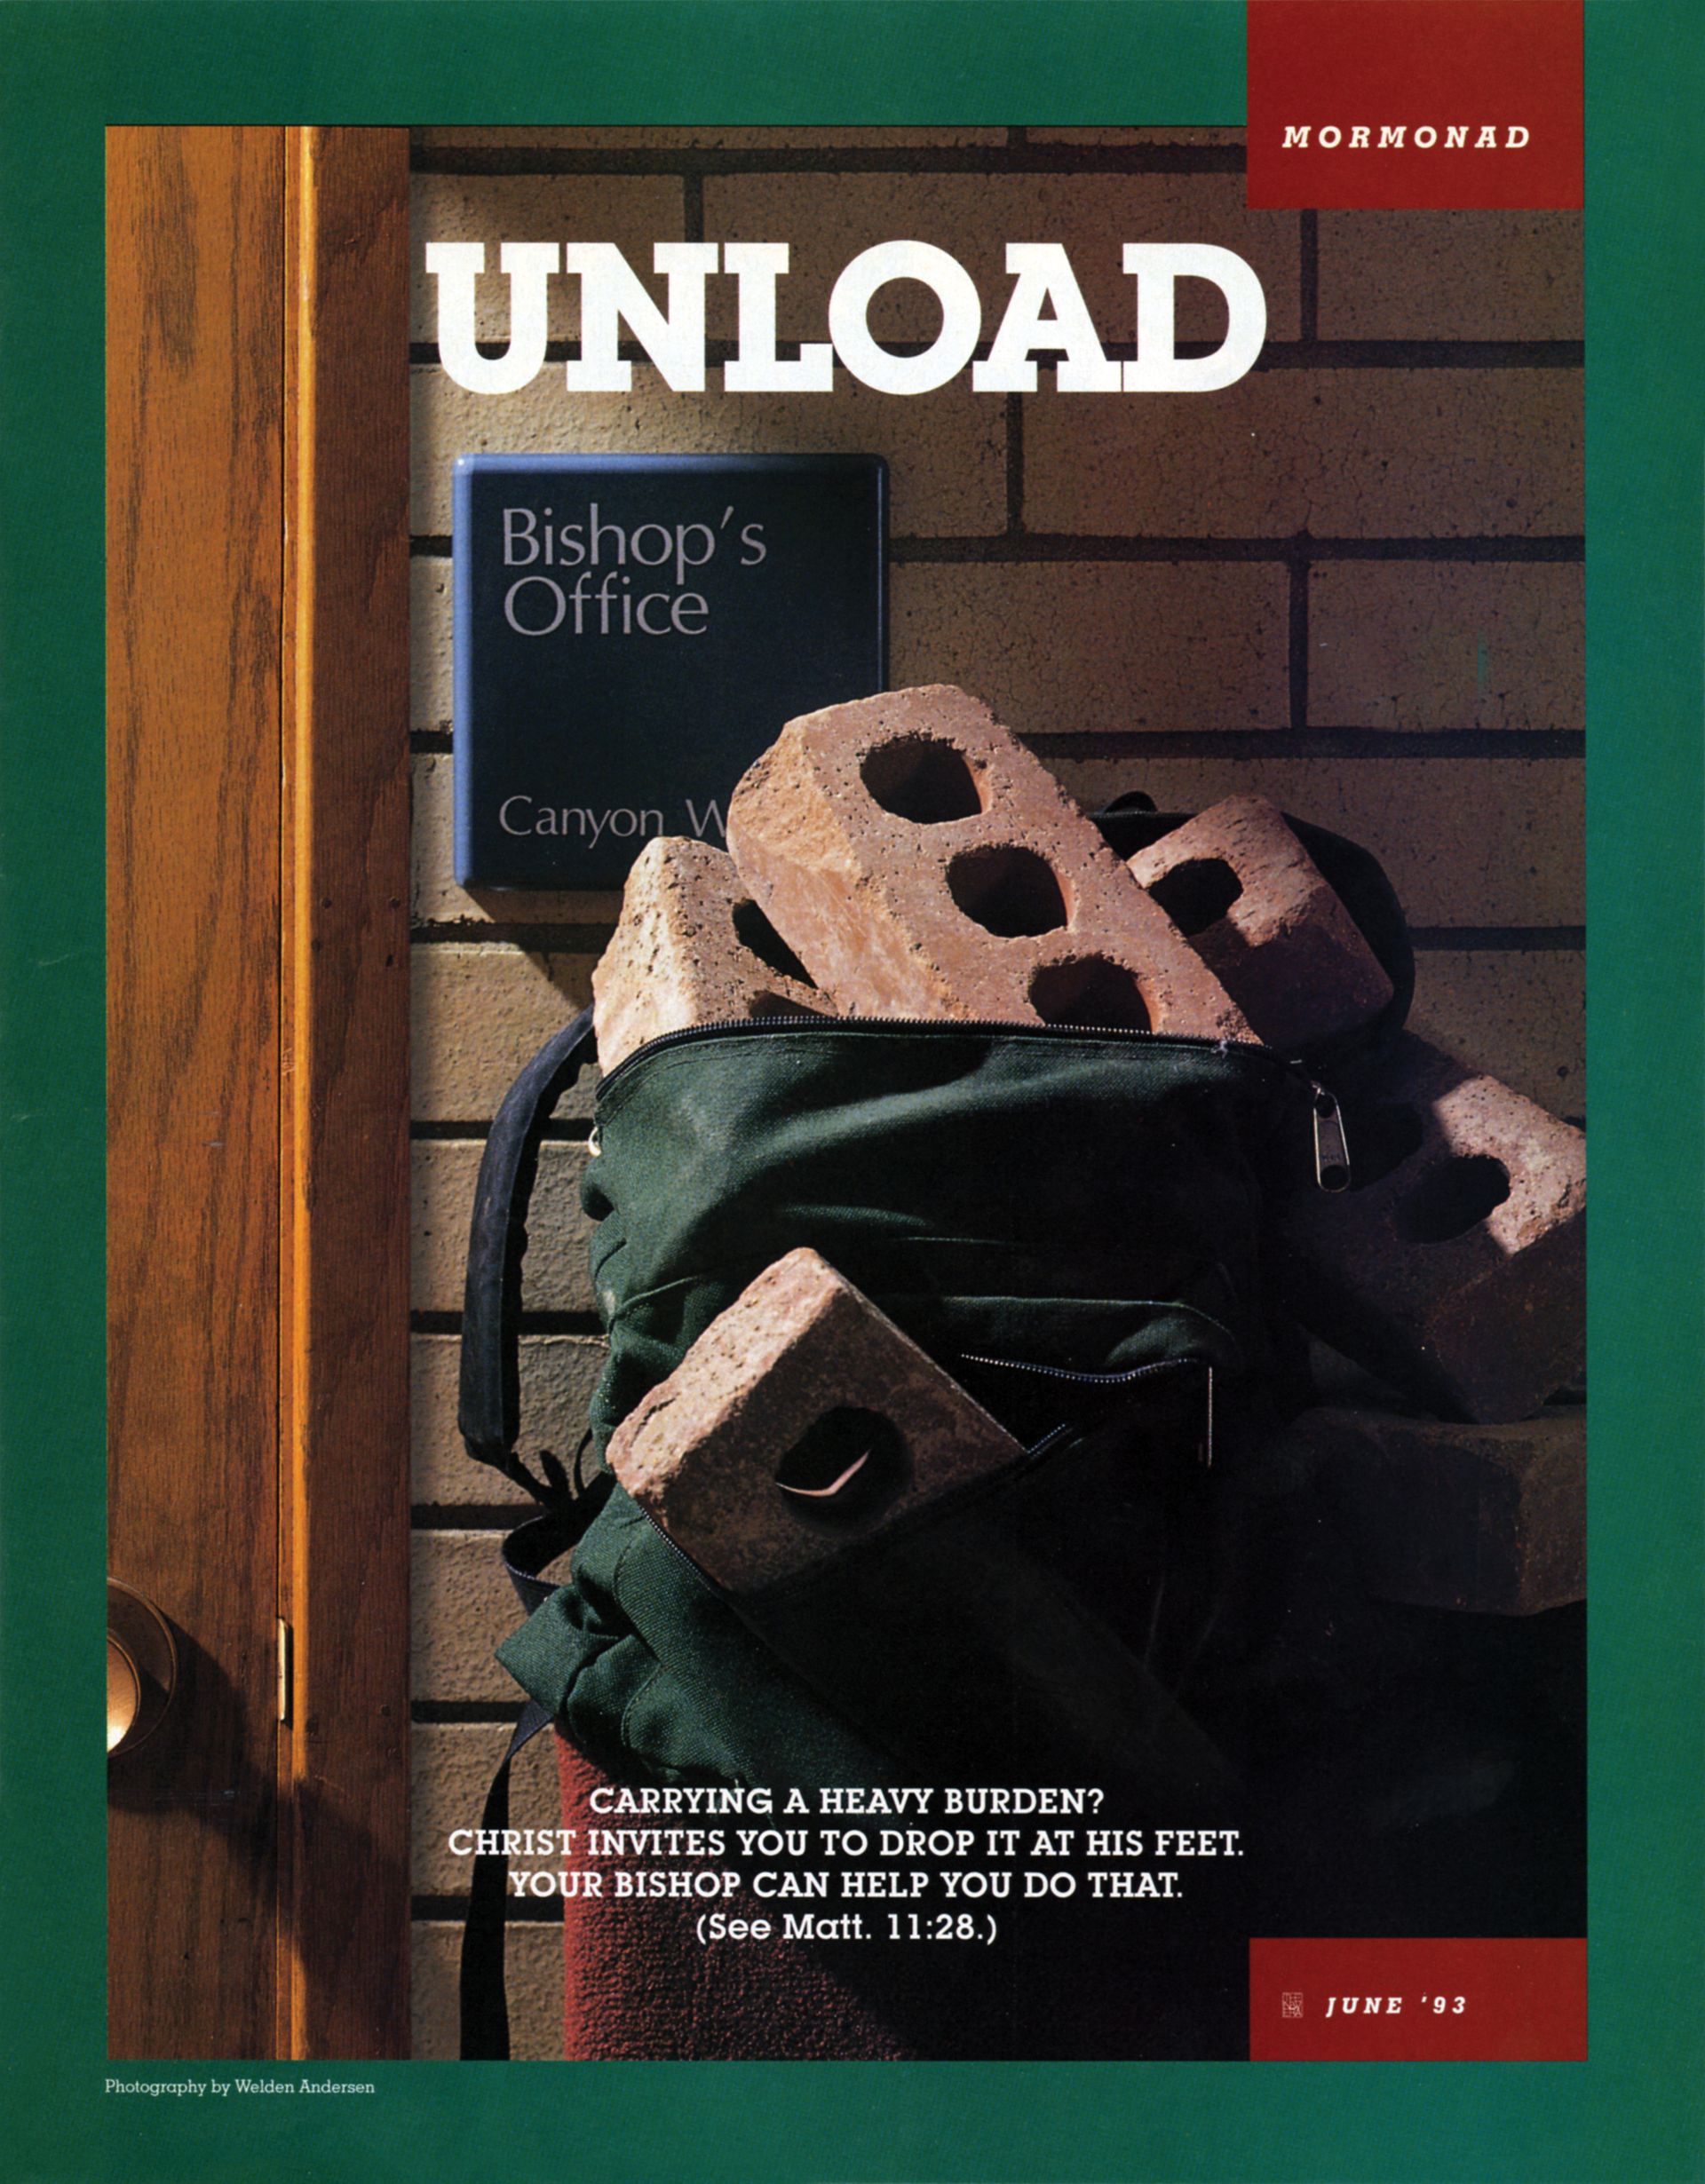 Unload. Carrying a heavy burden? Christ invites you to drop it at His feet. Your bishop can help you do that. (See Matt. 11:28.) June 1993 © undefined ipCode 1.